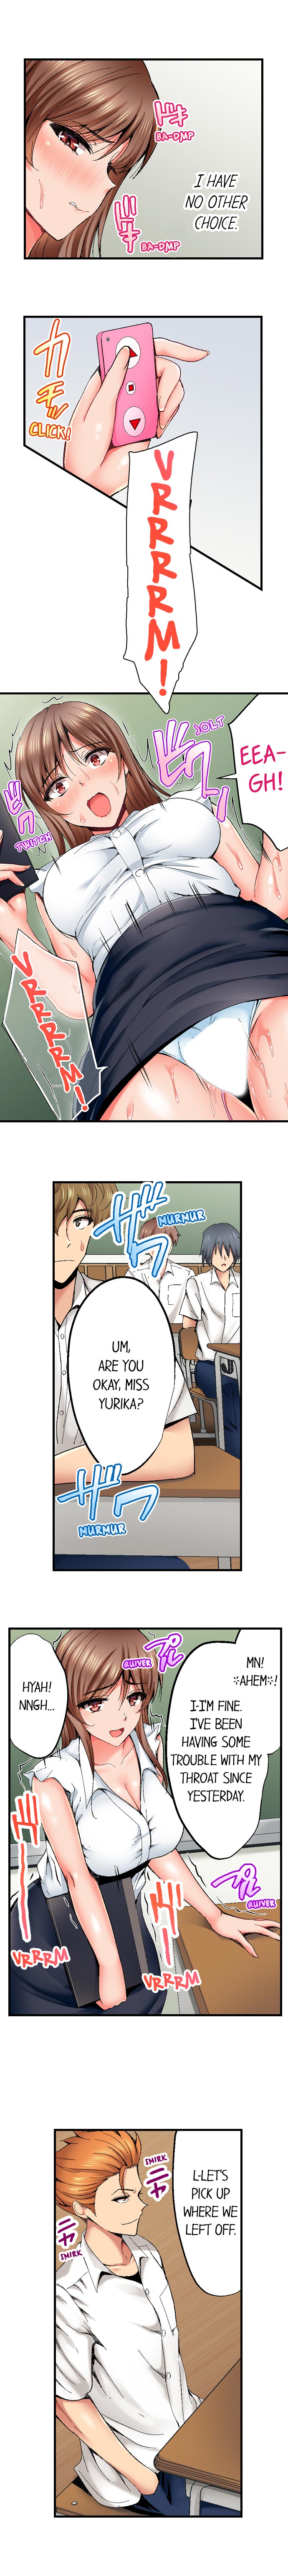 Netorare My Teacher With My Friends - Chapter 7 Page 5